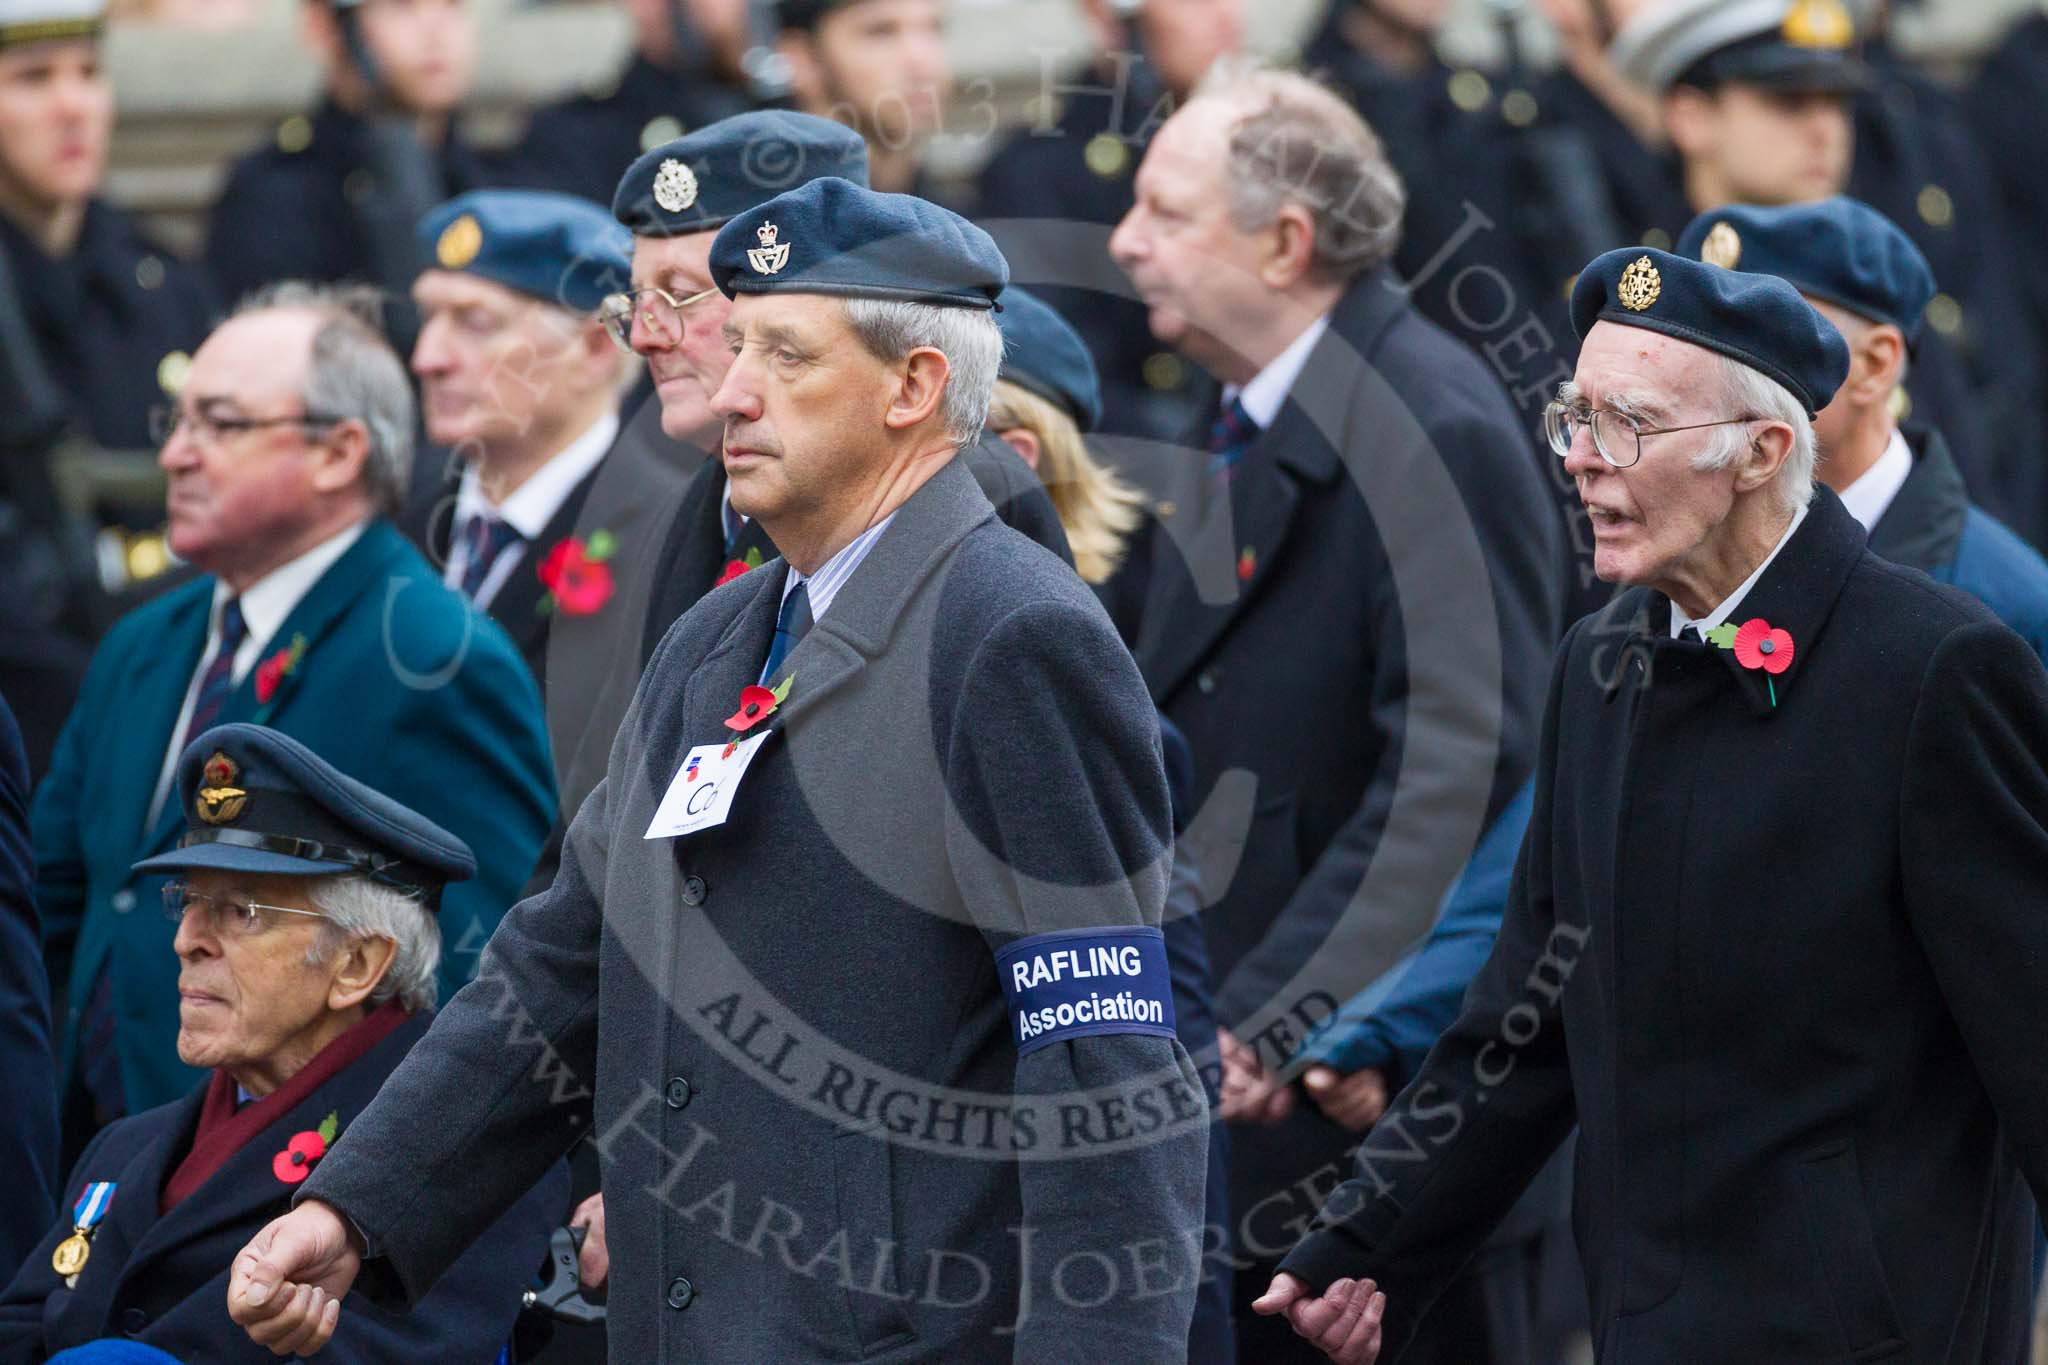 Remembrance Sunday at the Cenotaph 2015: Group C6, RAFLING Association.
Cenotaph, Whitehall, London SW1,
London,
Greater London,
United Kingdom,
on 08 November 2015 at 11:48, image #467